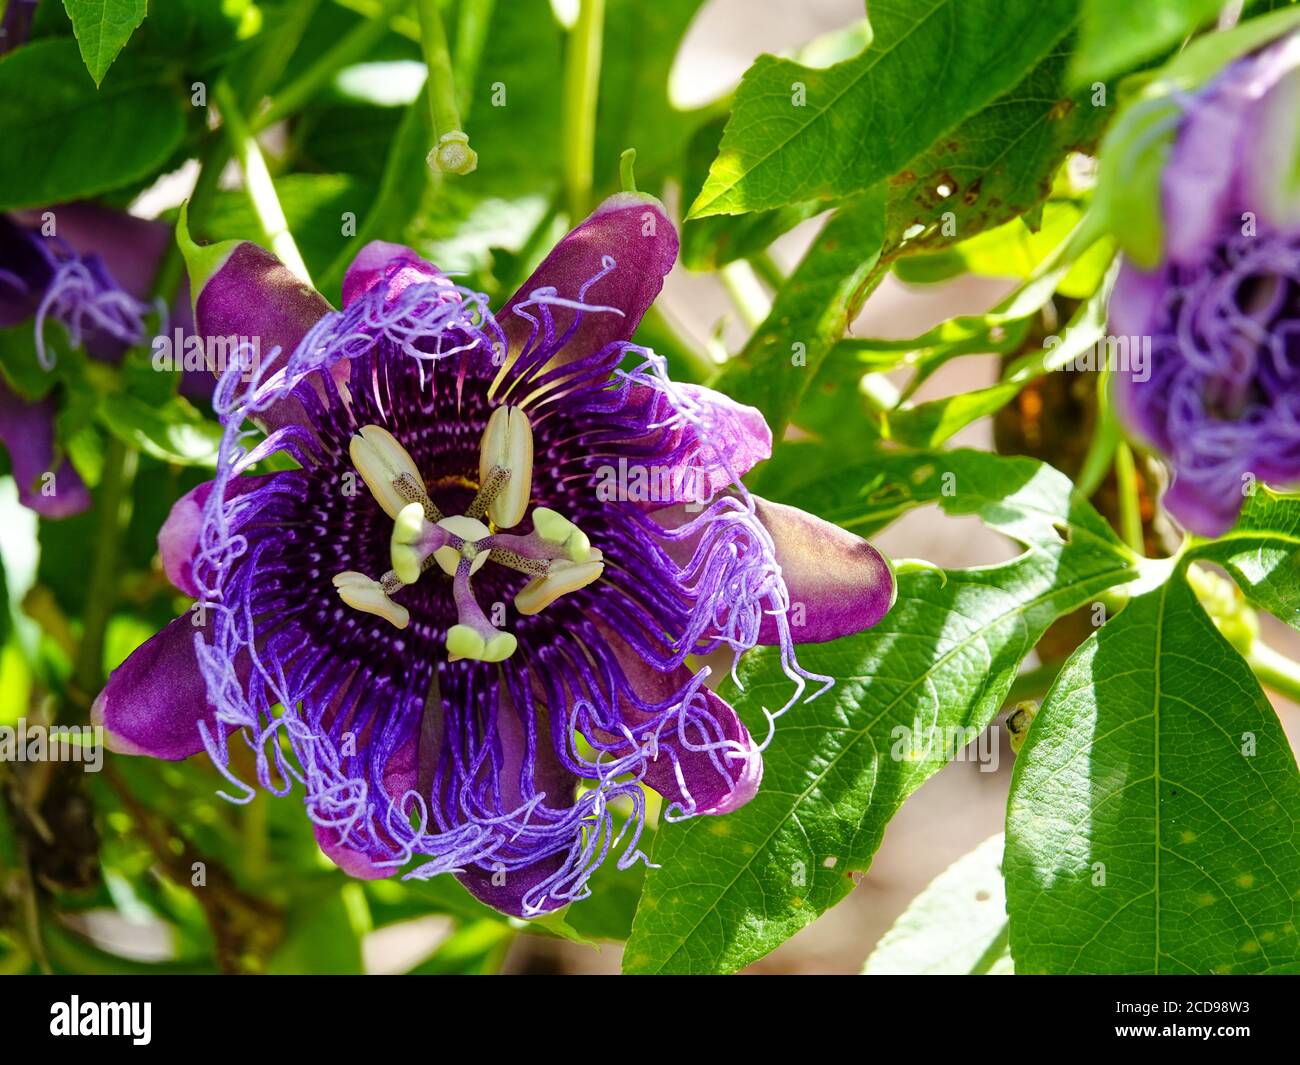 Purple Flower Wild Vine High Resolution Stock Photography And Images Alamy